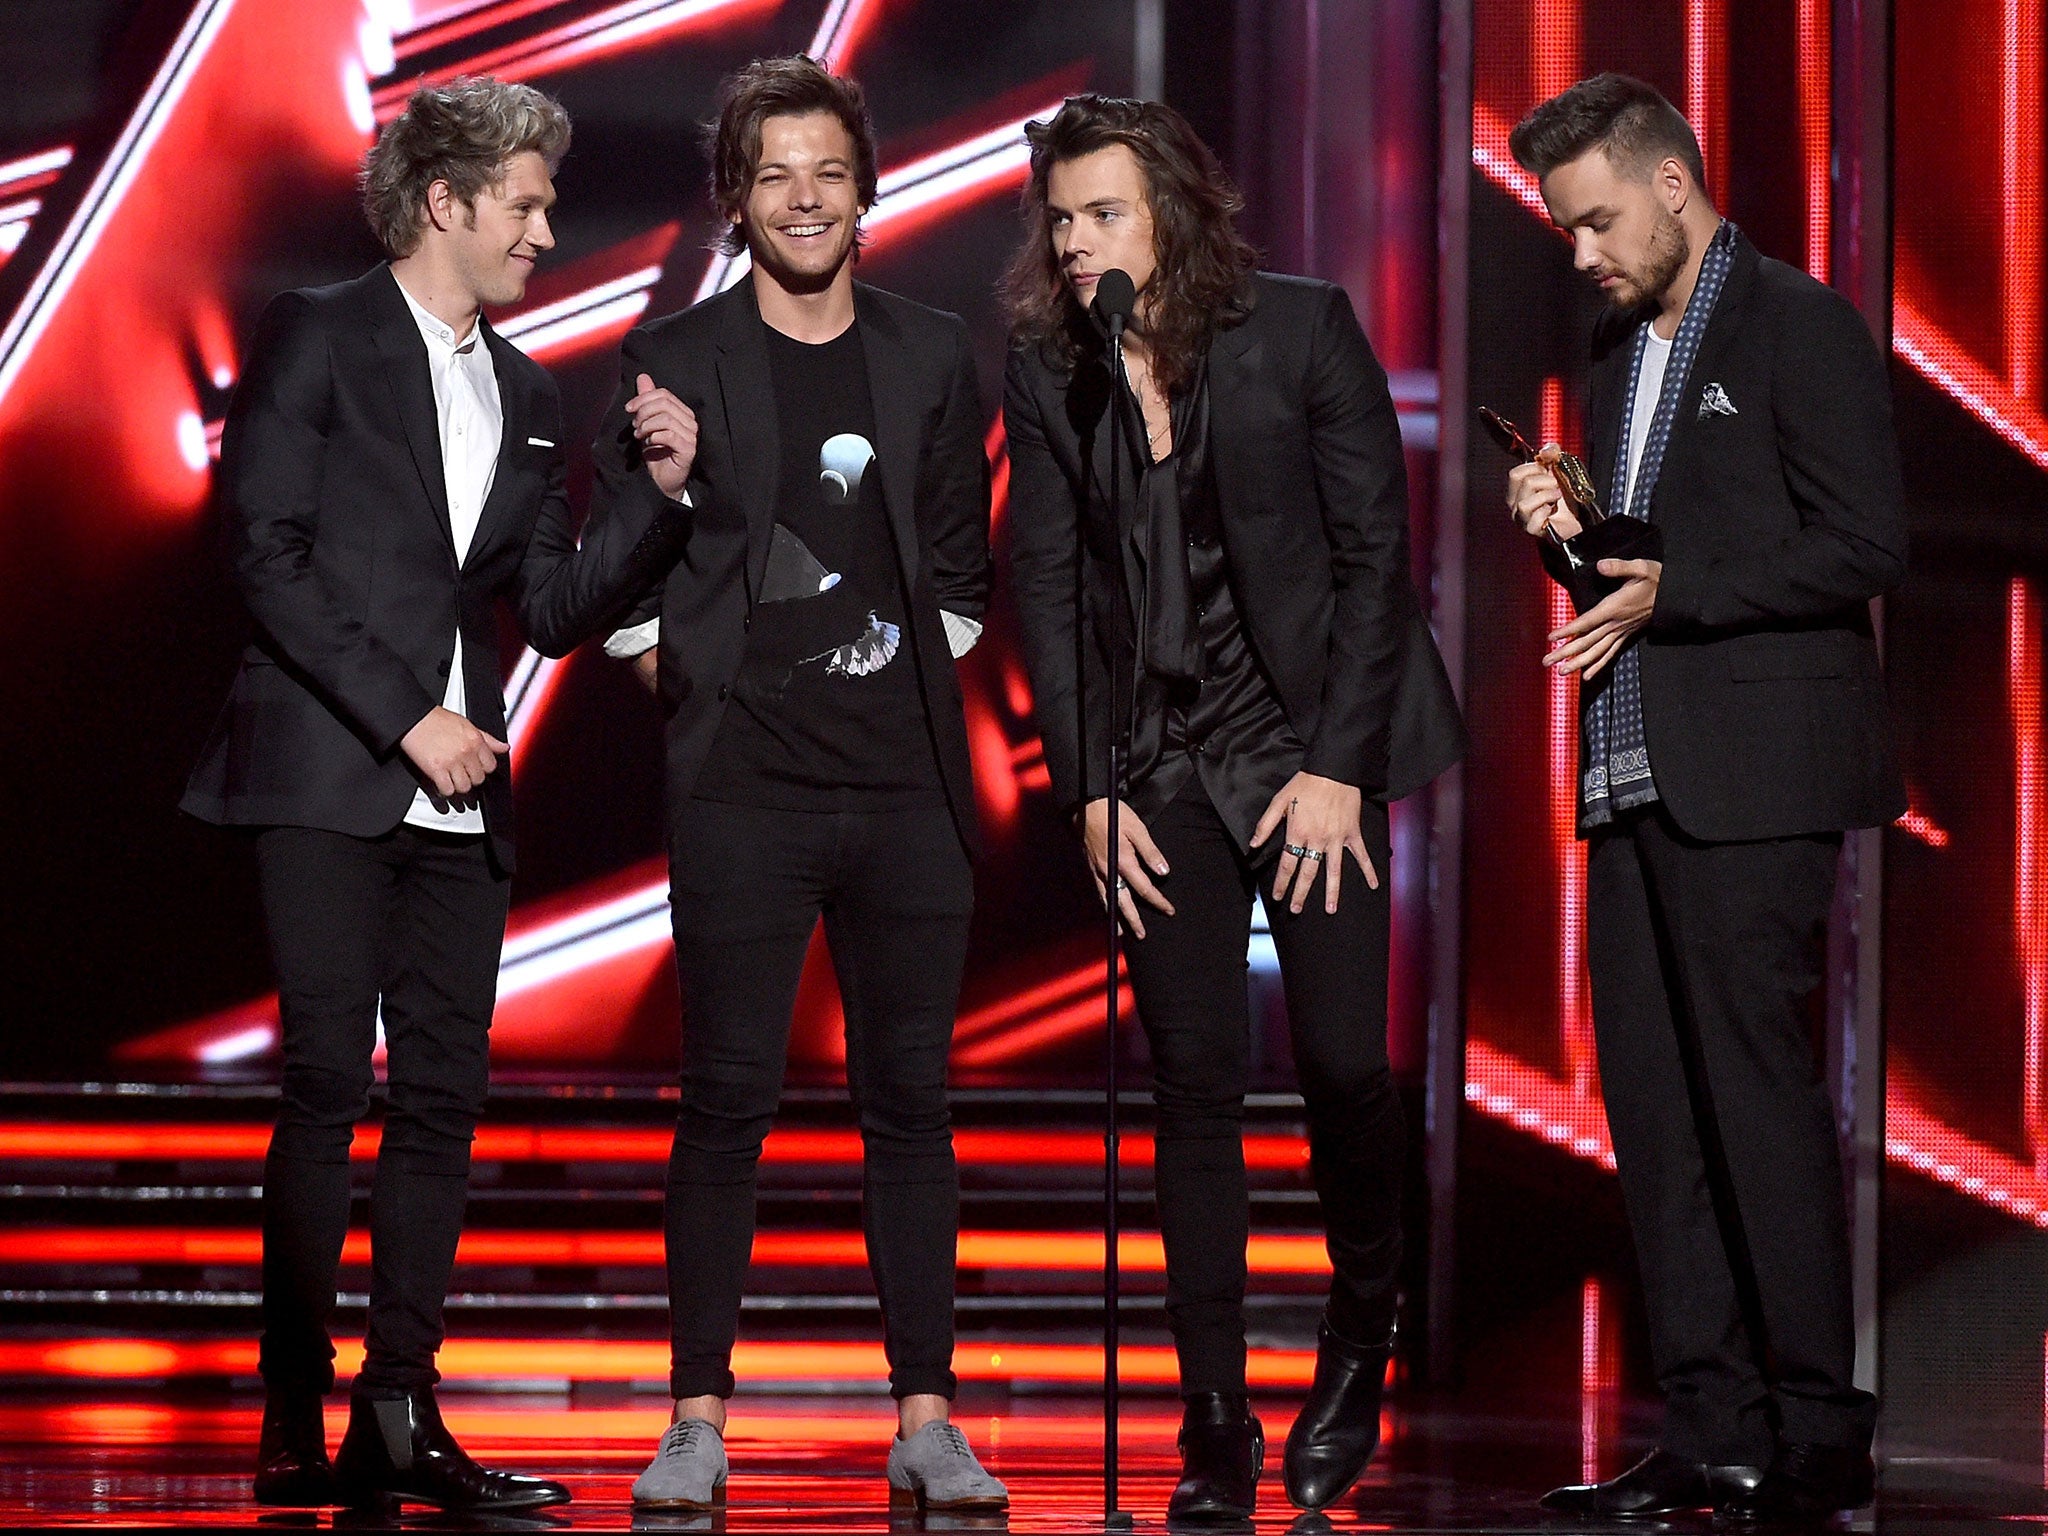 One Direction win Top Group at the Billboard Music Awards 2015